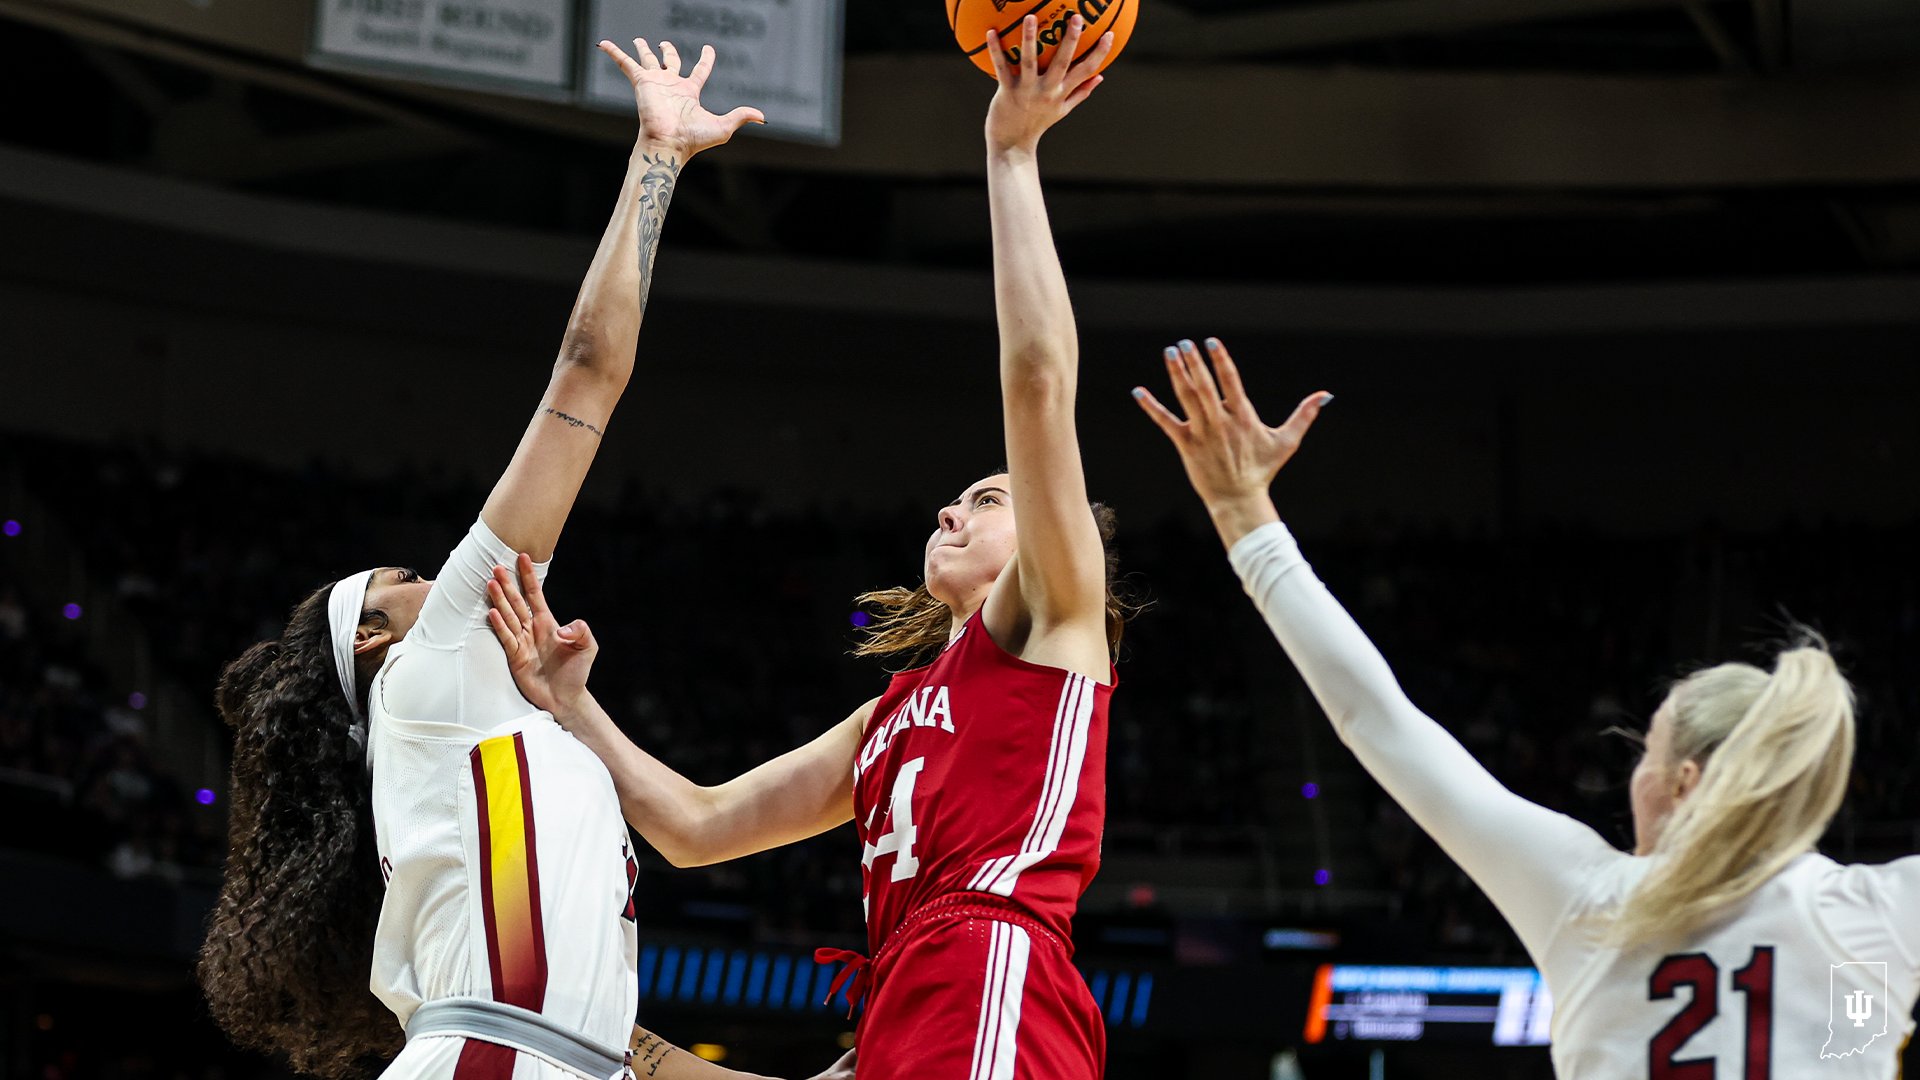 Indiana’s season ends in Sweet Sixteen with loss against No. 1 South Carolina